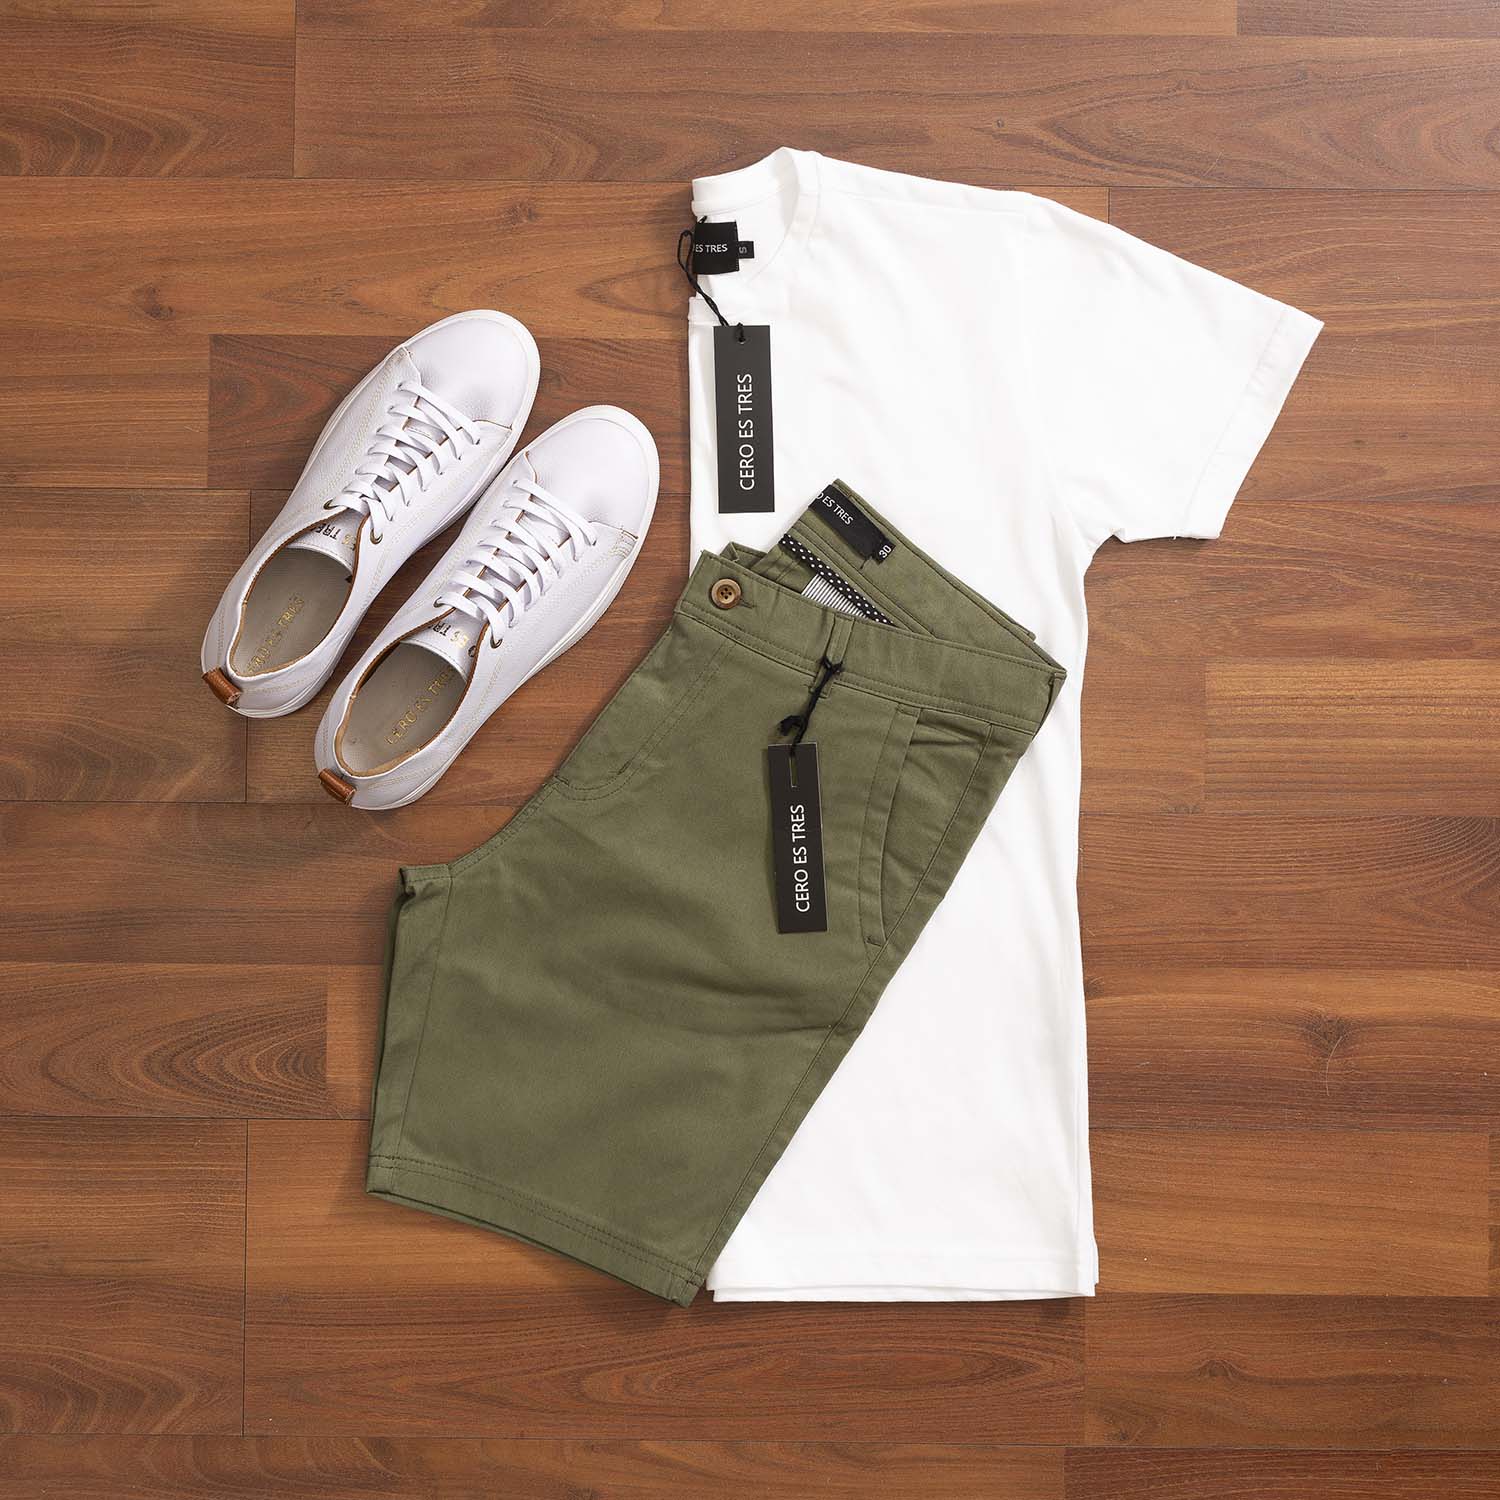 OUTFIT CERO 471